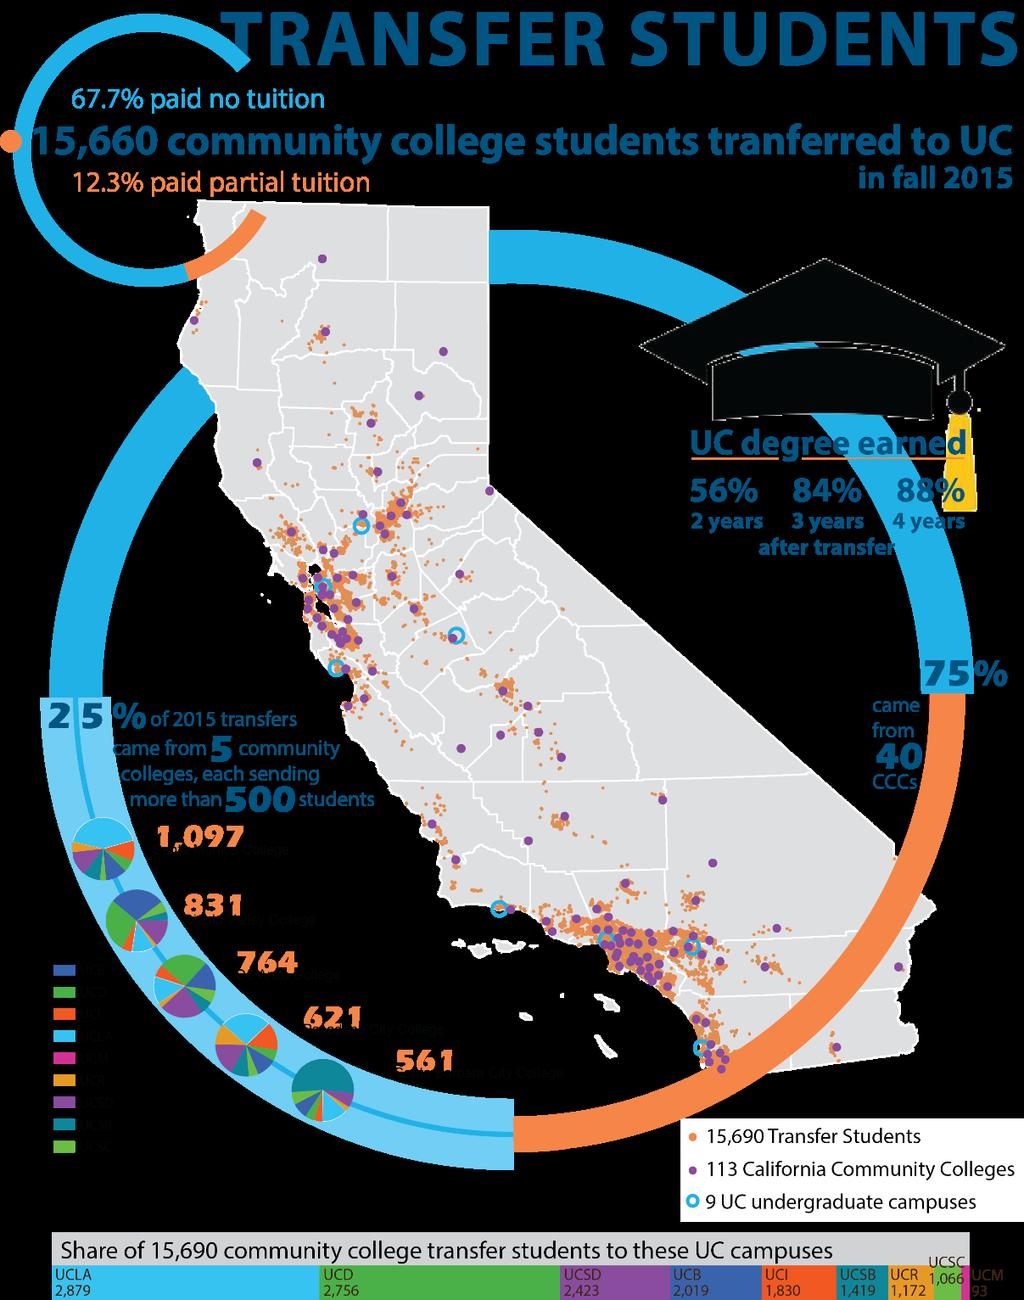 How does the University of California use geodata?